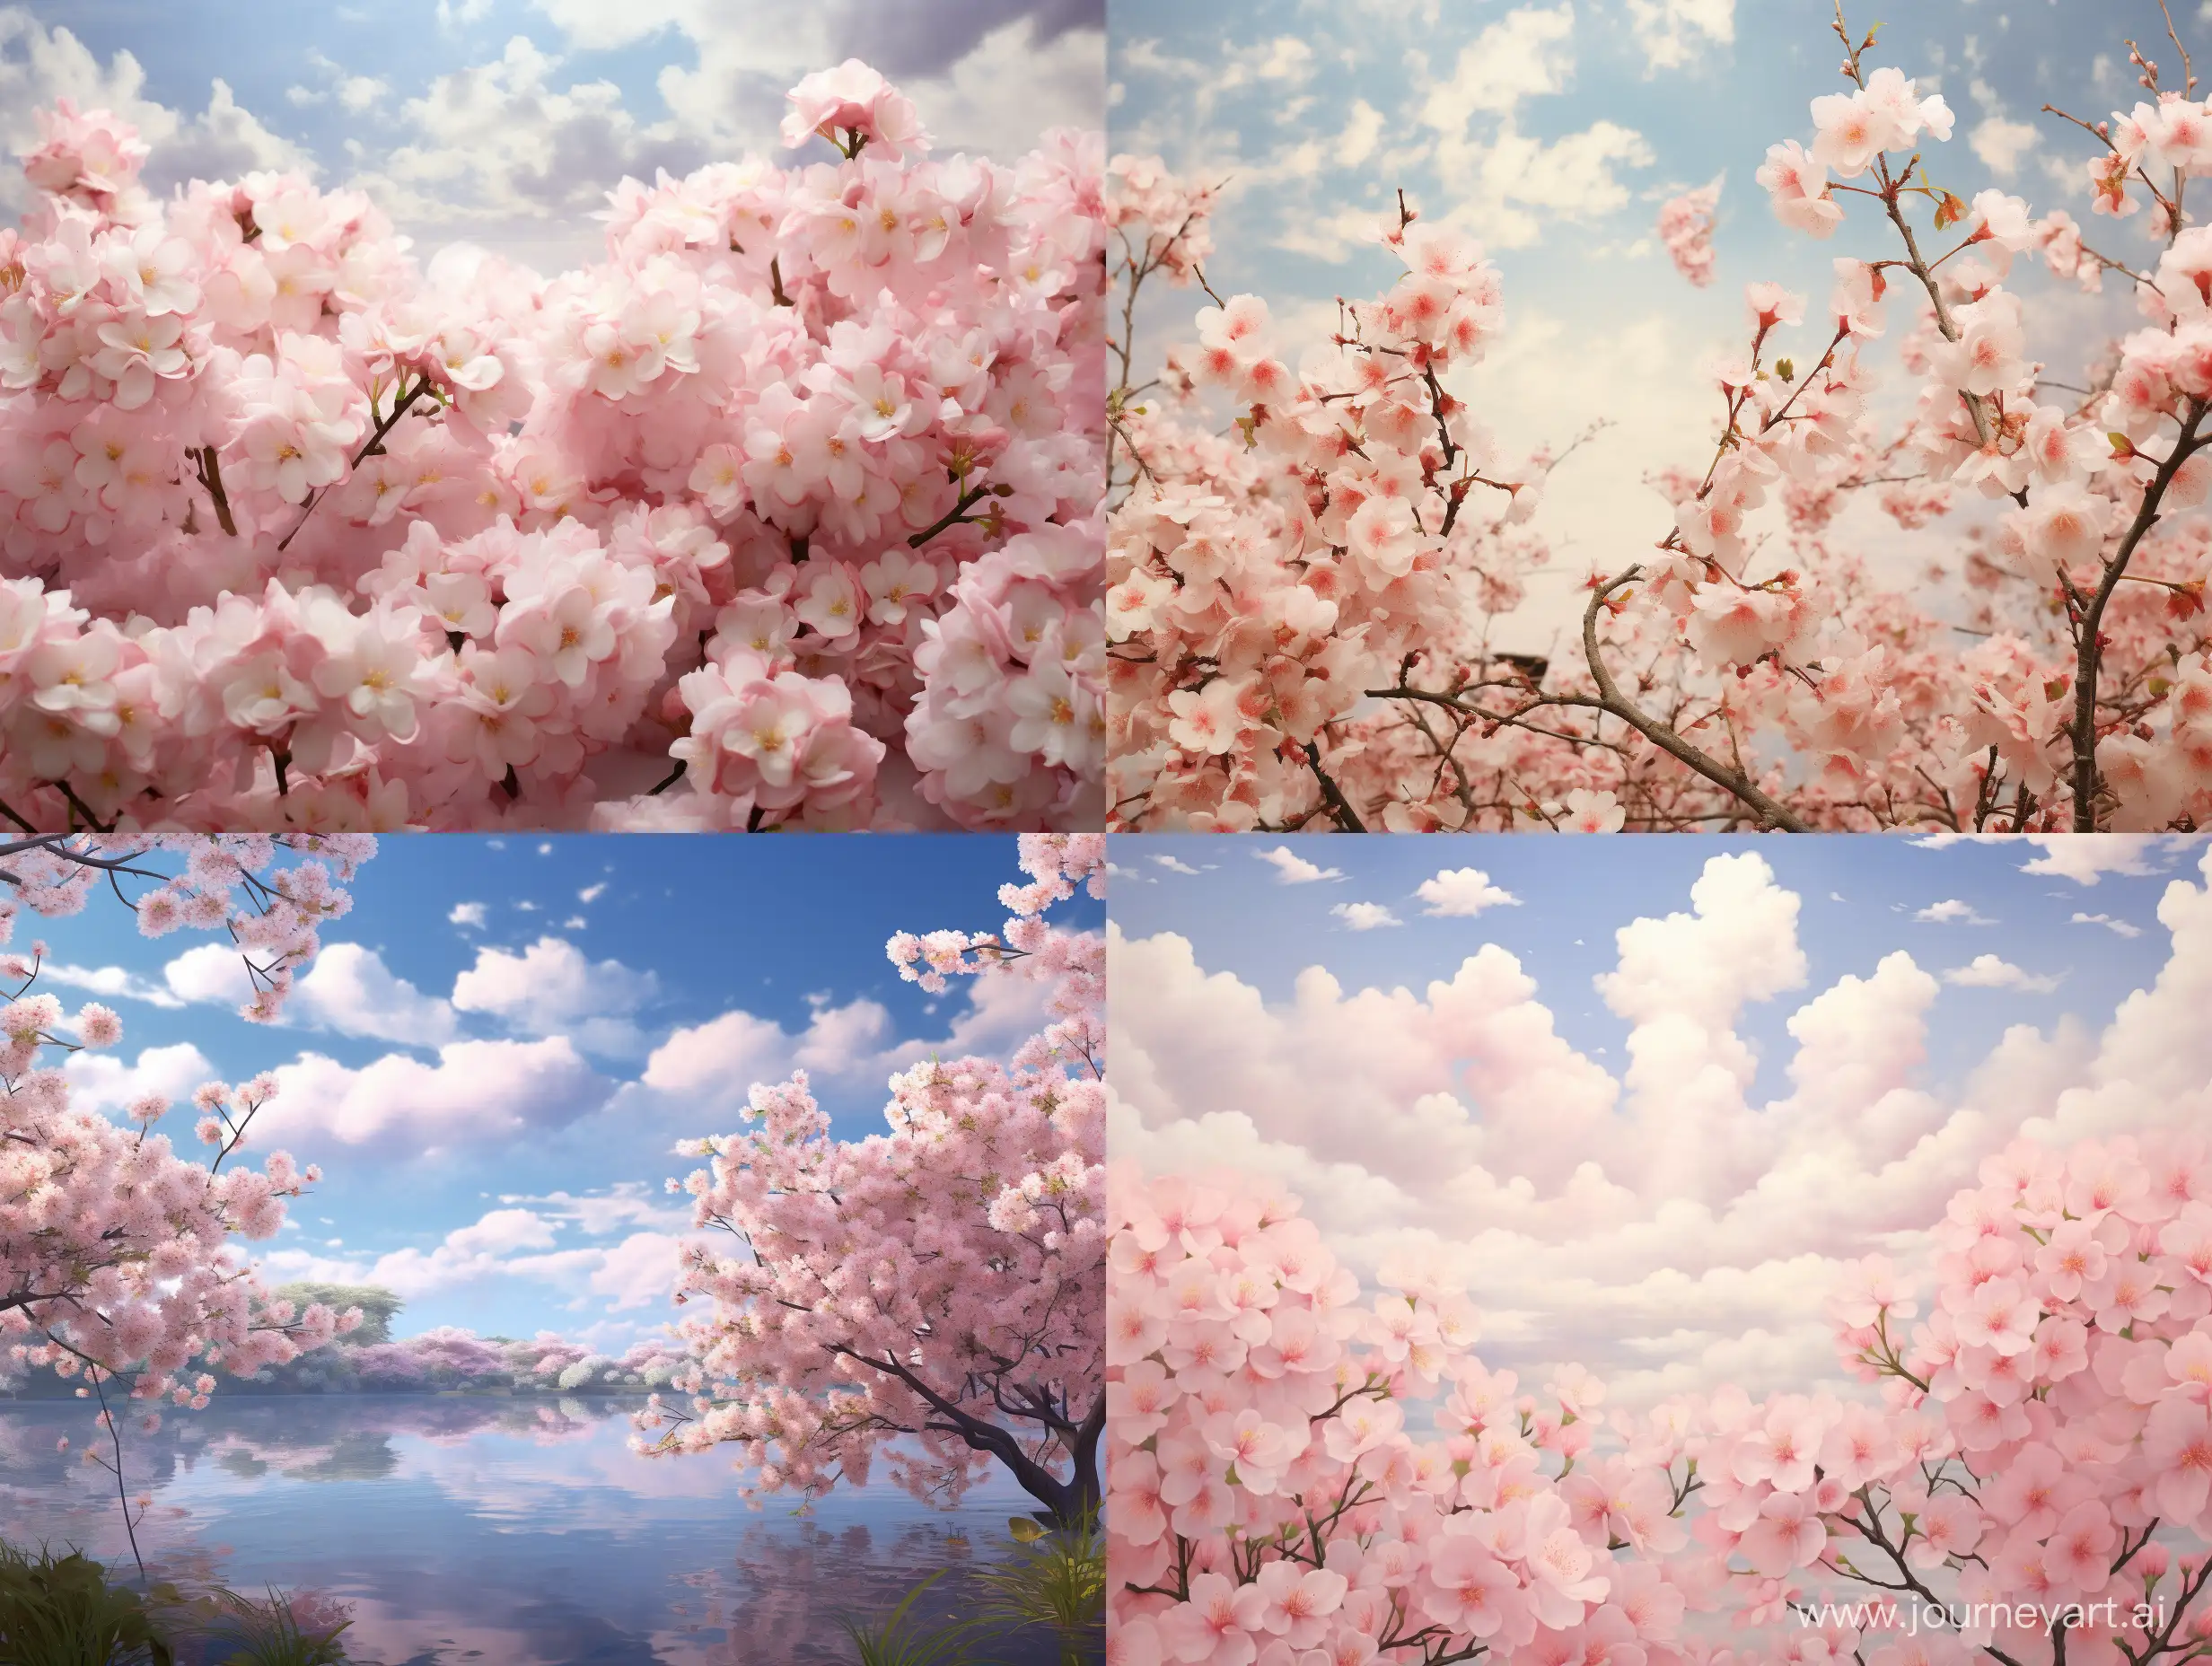 Tranquil-Sky-with-Cherry-Blossoms-Photorealistic-Digital-Photography